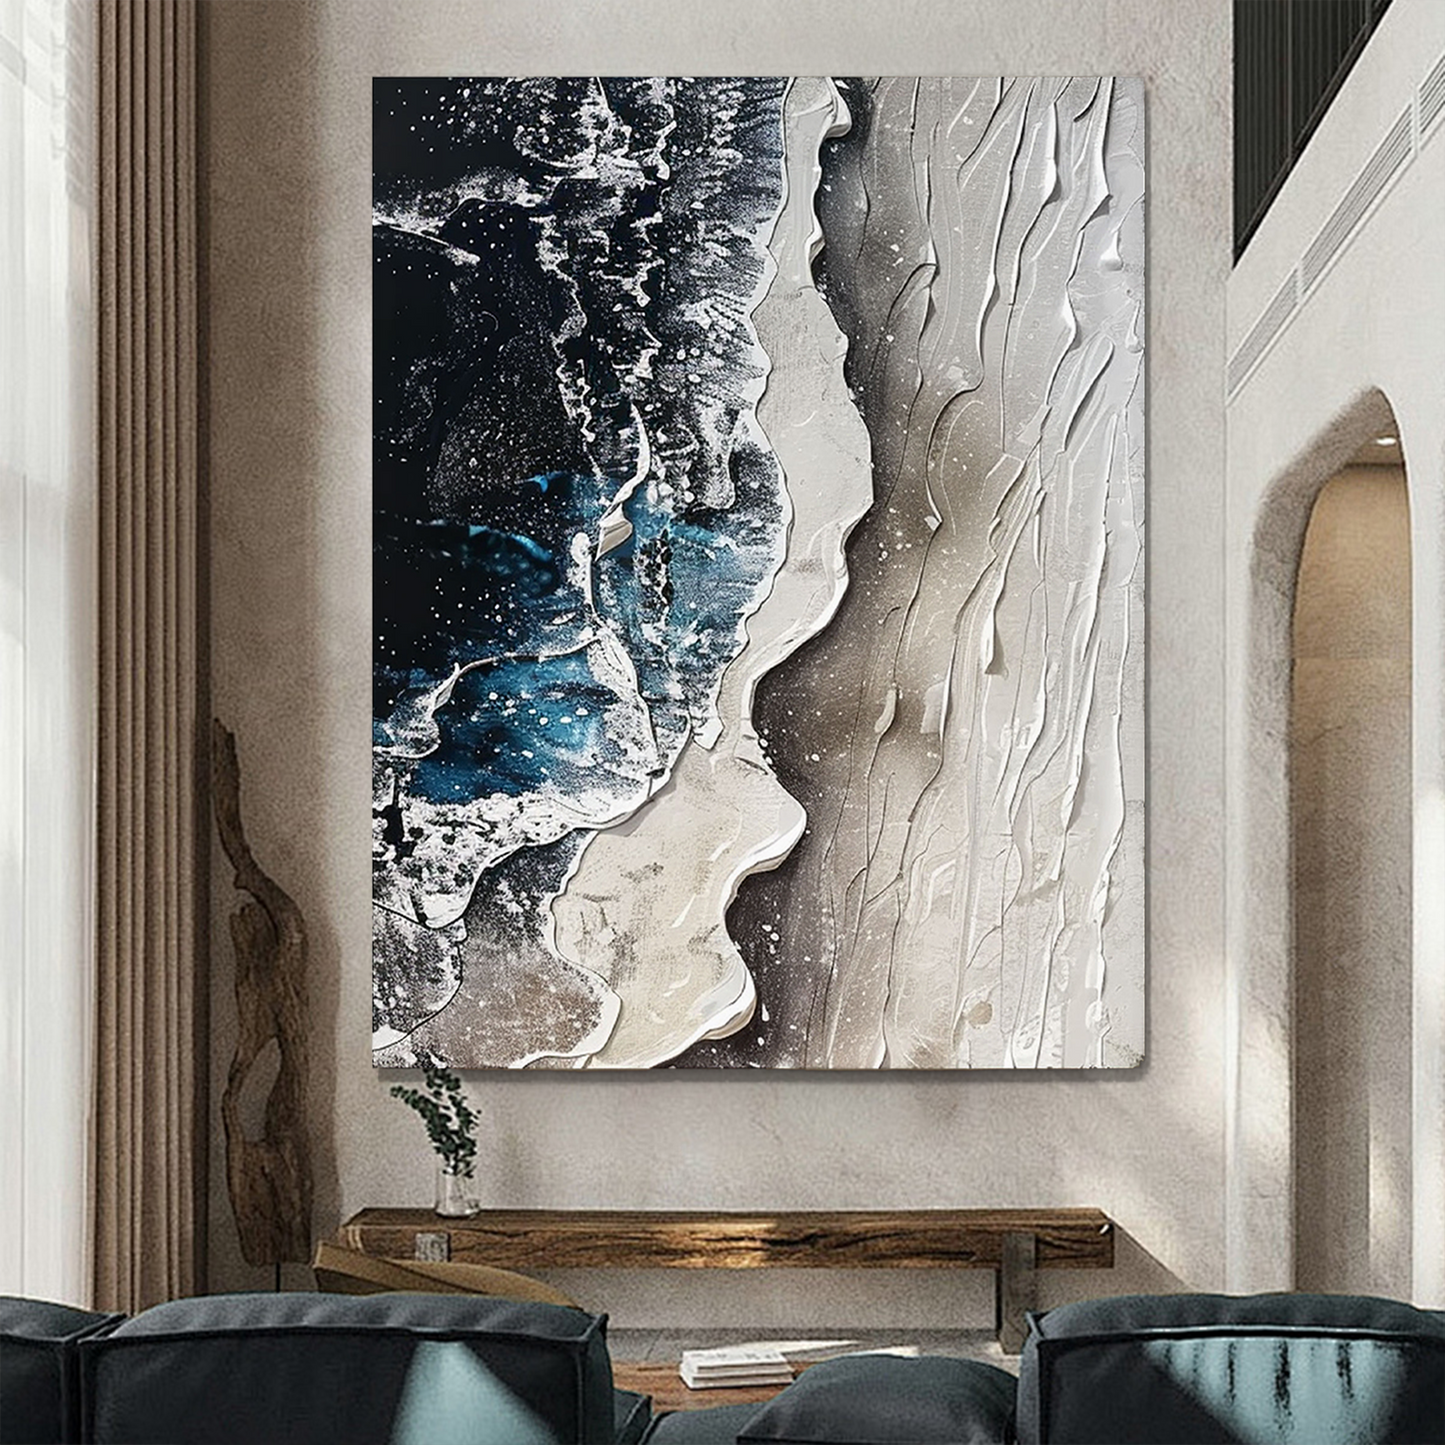 3D Textured Abstract Painting "Moonlit Shores"